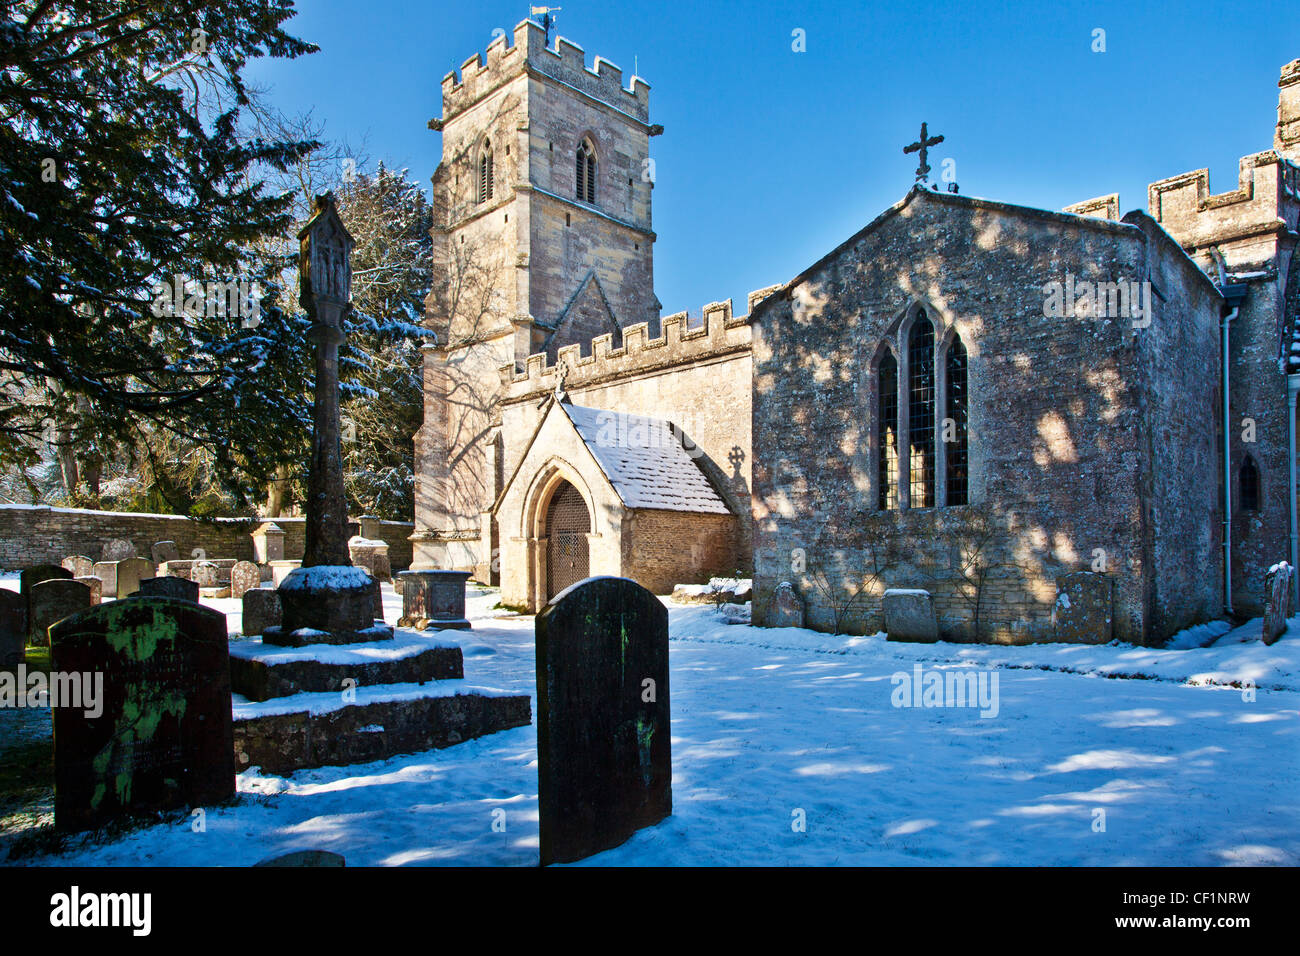 Snowy winter view of the Church of the Holy Rood or Cross in the Cotswold village of Ampney Crucis, Gloucestershire, England, UK Stock Photo